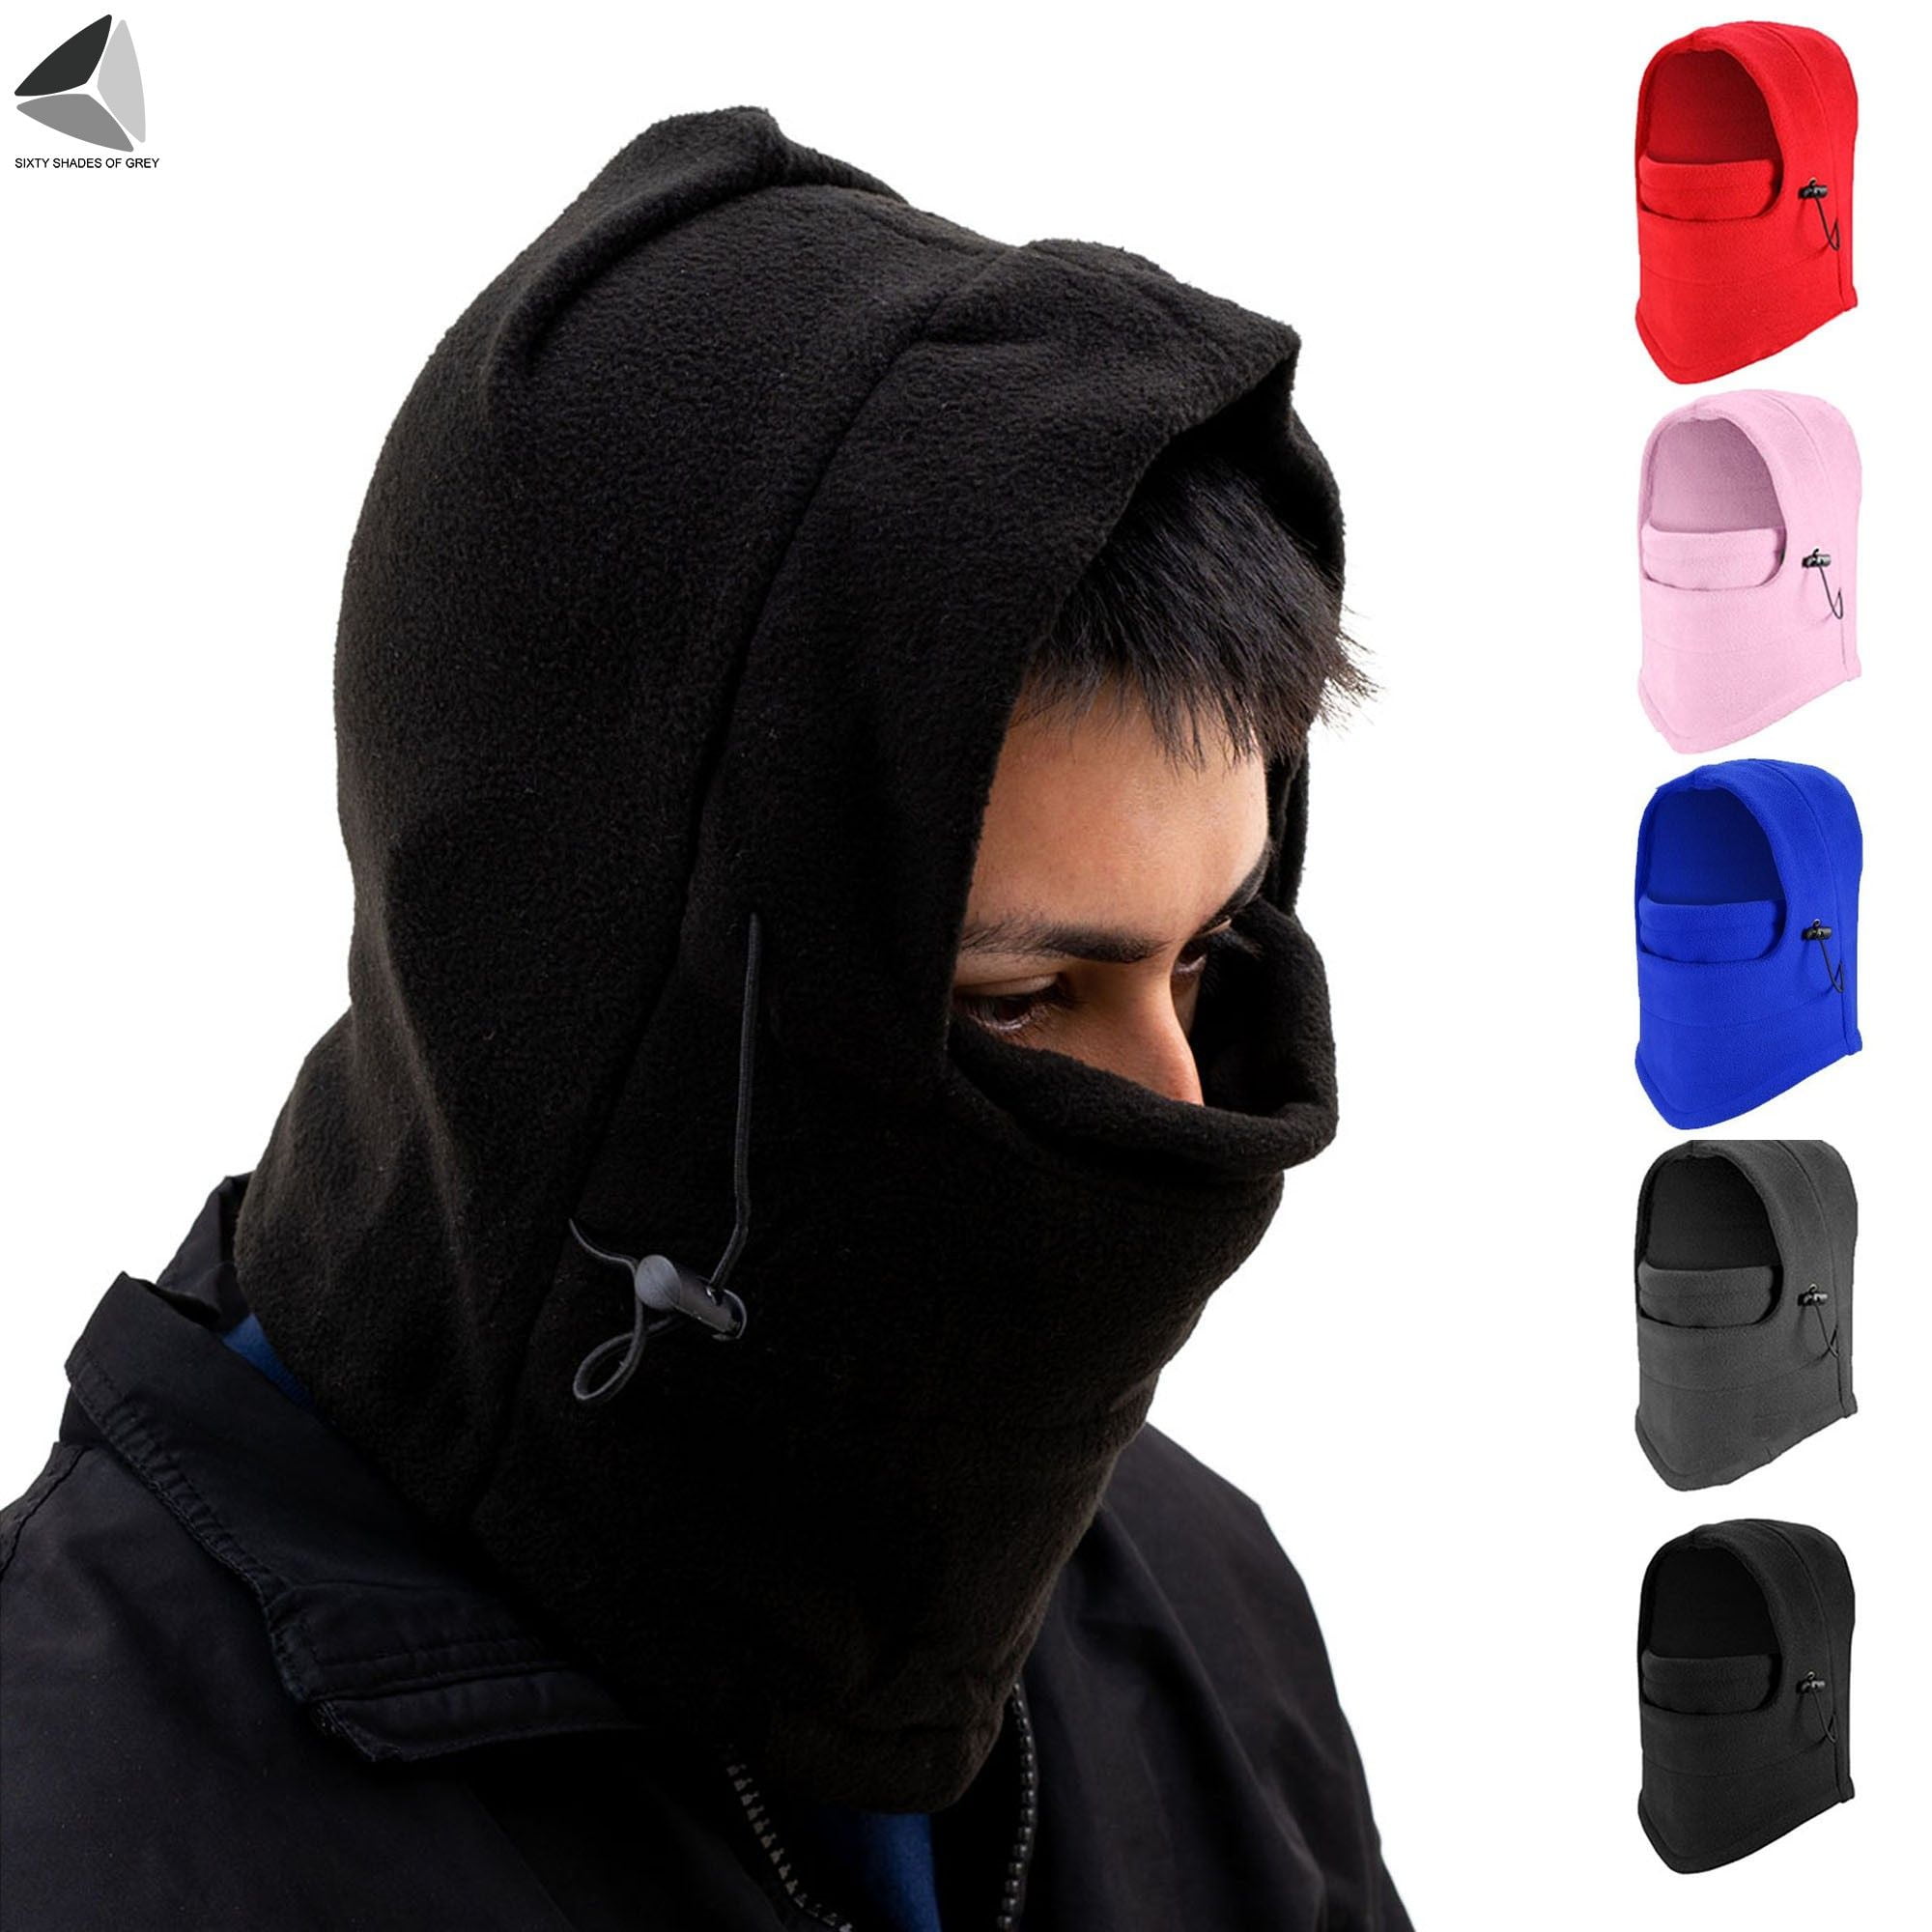 Balaclava Ski Mask for Men Women Windproof Face Mask for Winter Thick 01 Black 